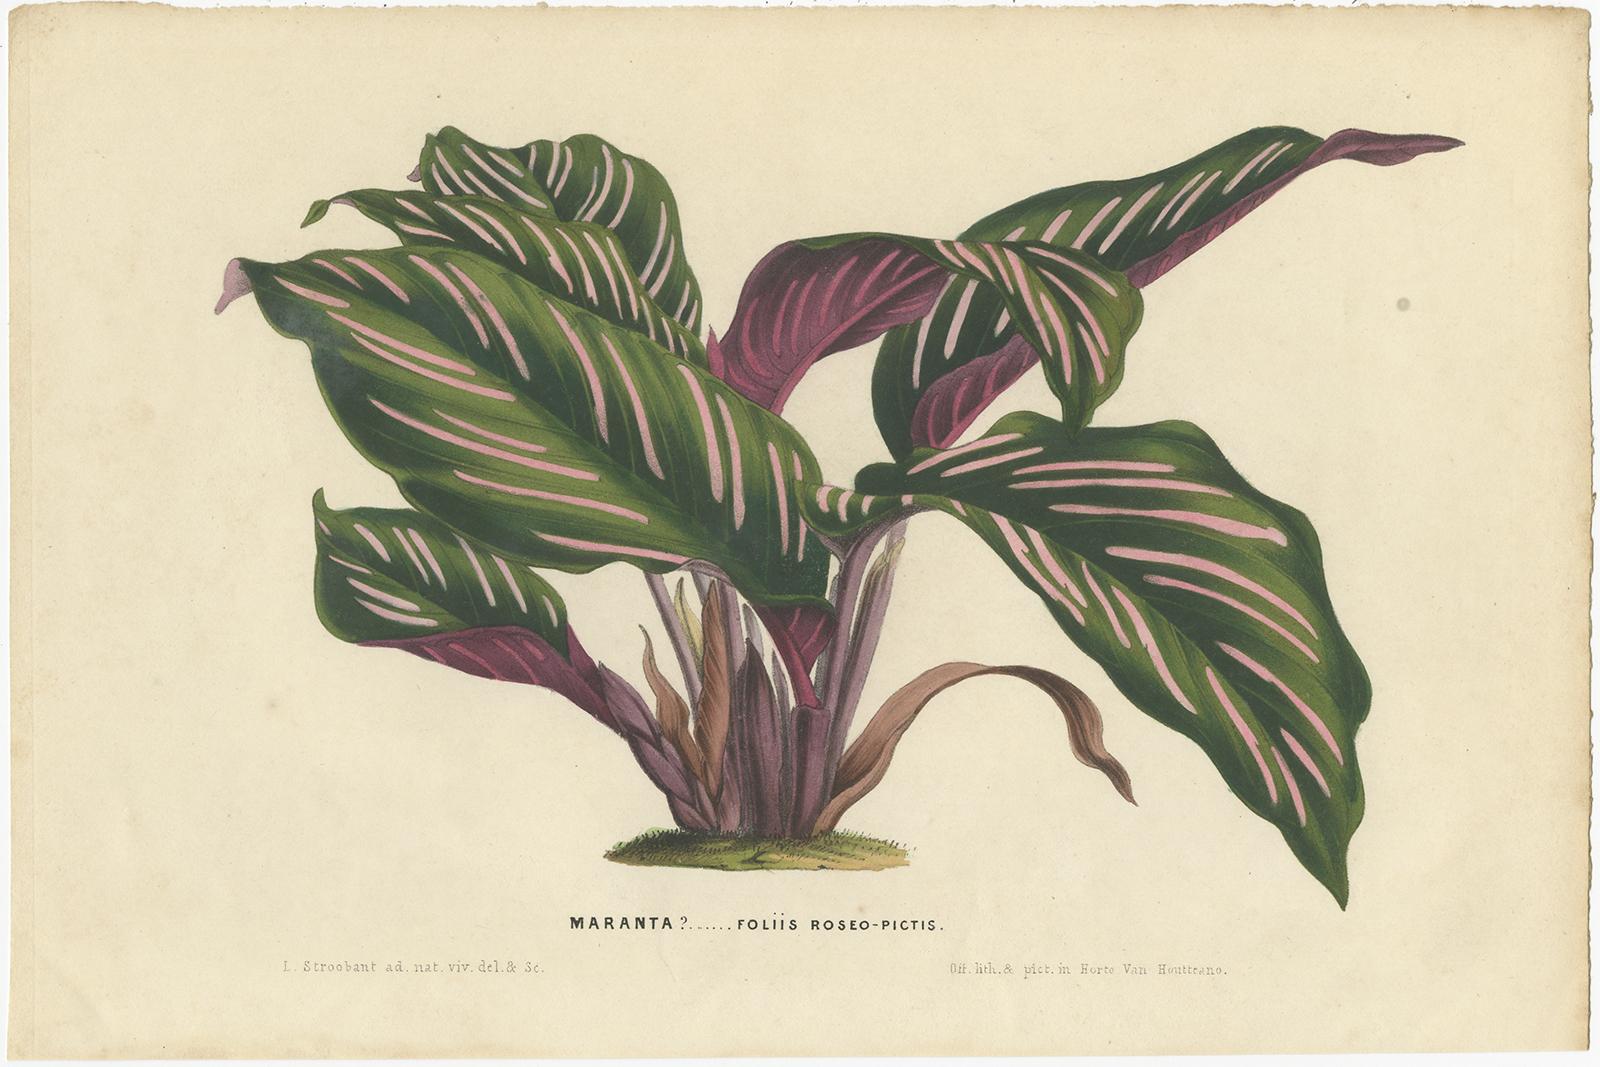 Set of two antique botany prints titled 'Maranta? Foliis Albo-Pictis - Maranta? Foliis Roseo-Pictis'. Two lithographs depicting maranta plant species. These prints originate from volume 4 of 'Flore des Serres' by Louis van Houtte. Published in 1848.